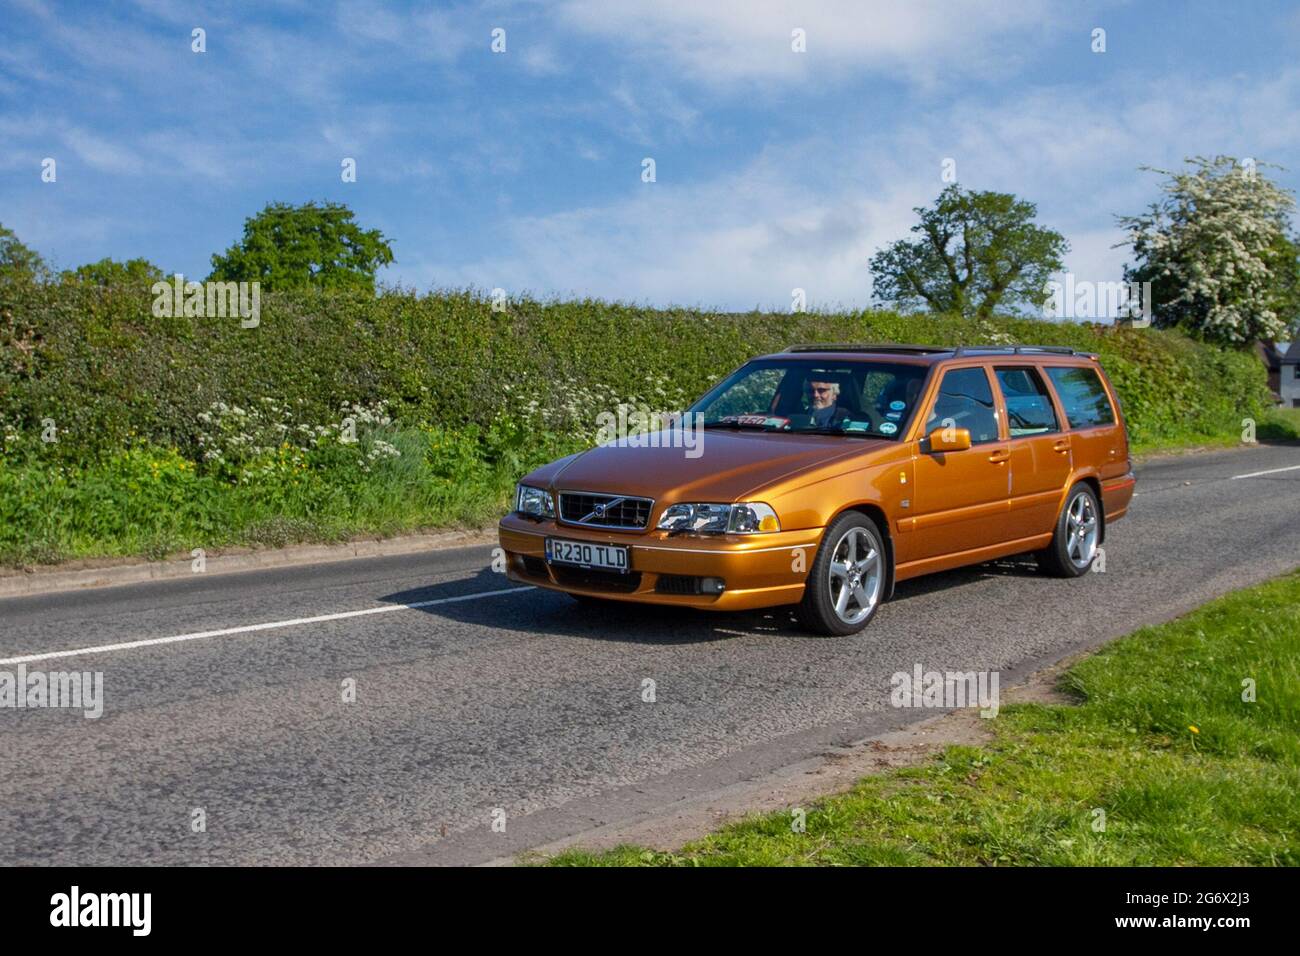 1998 90s nineties classic gold Volvo SE T5 V70 estate 2319cc petrol en-route to Capesthorne Hall classic May car show, Cheshire, UK Stock Photo